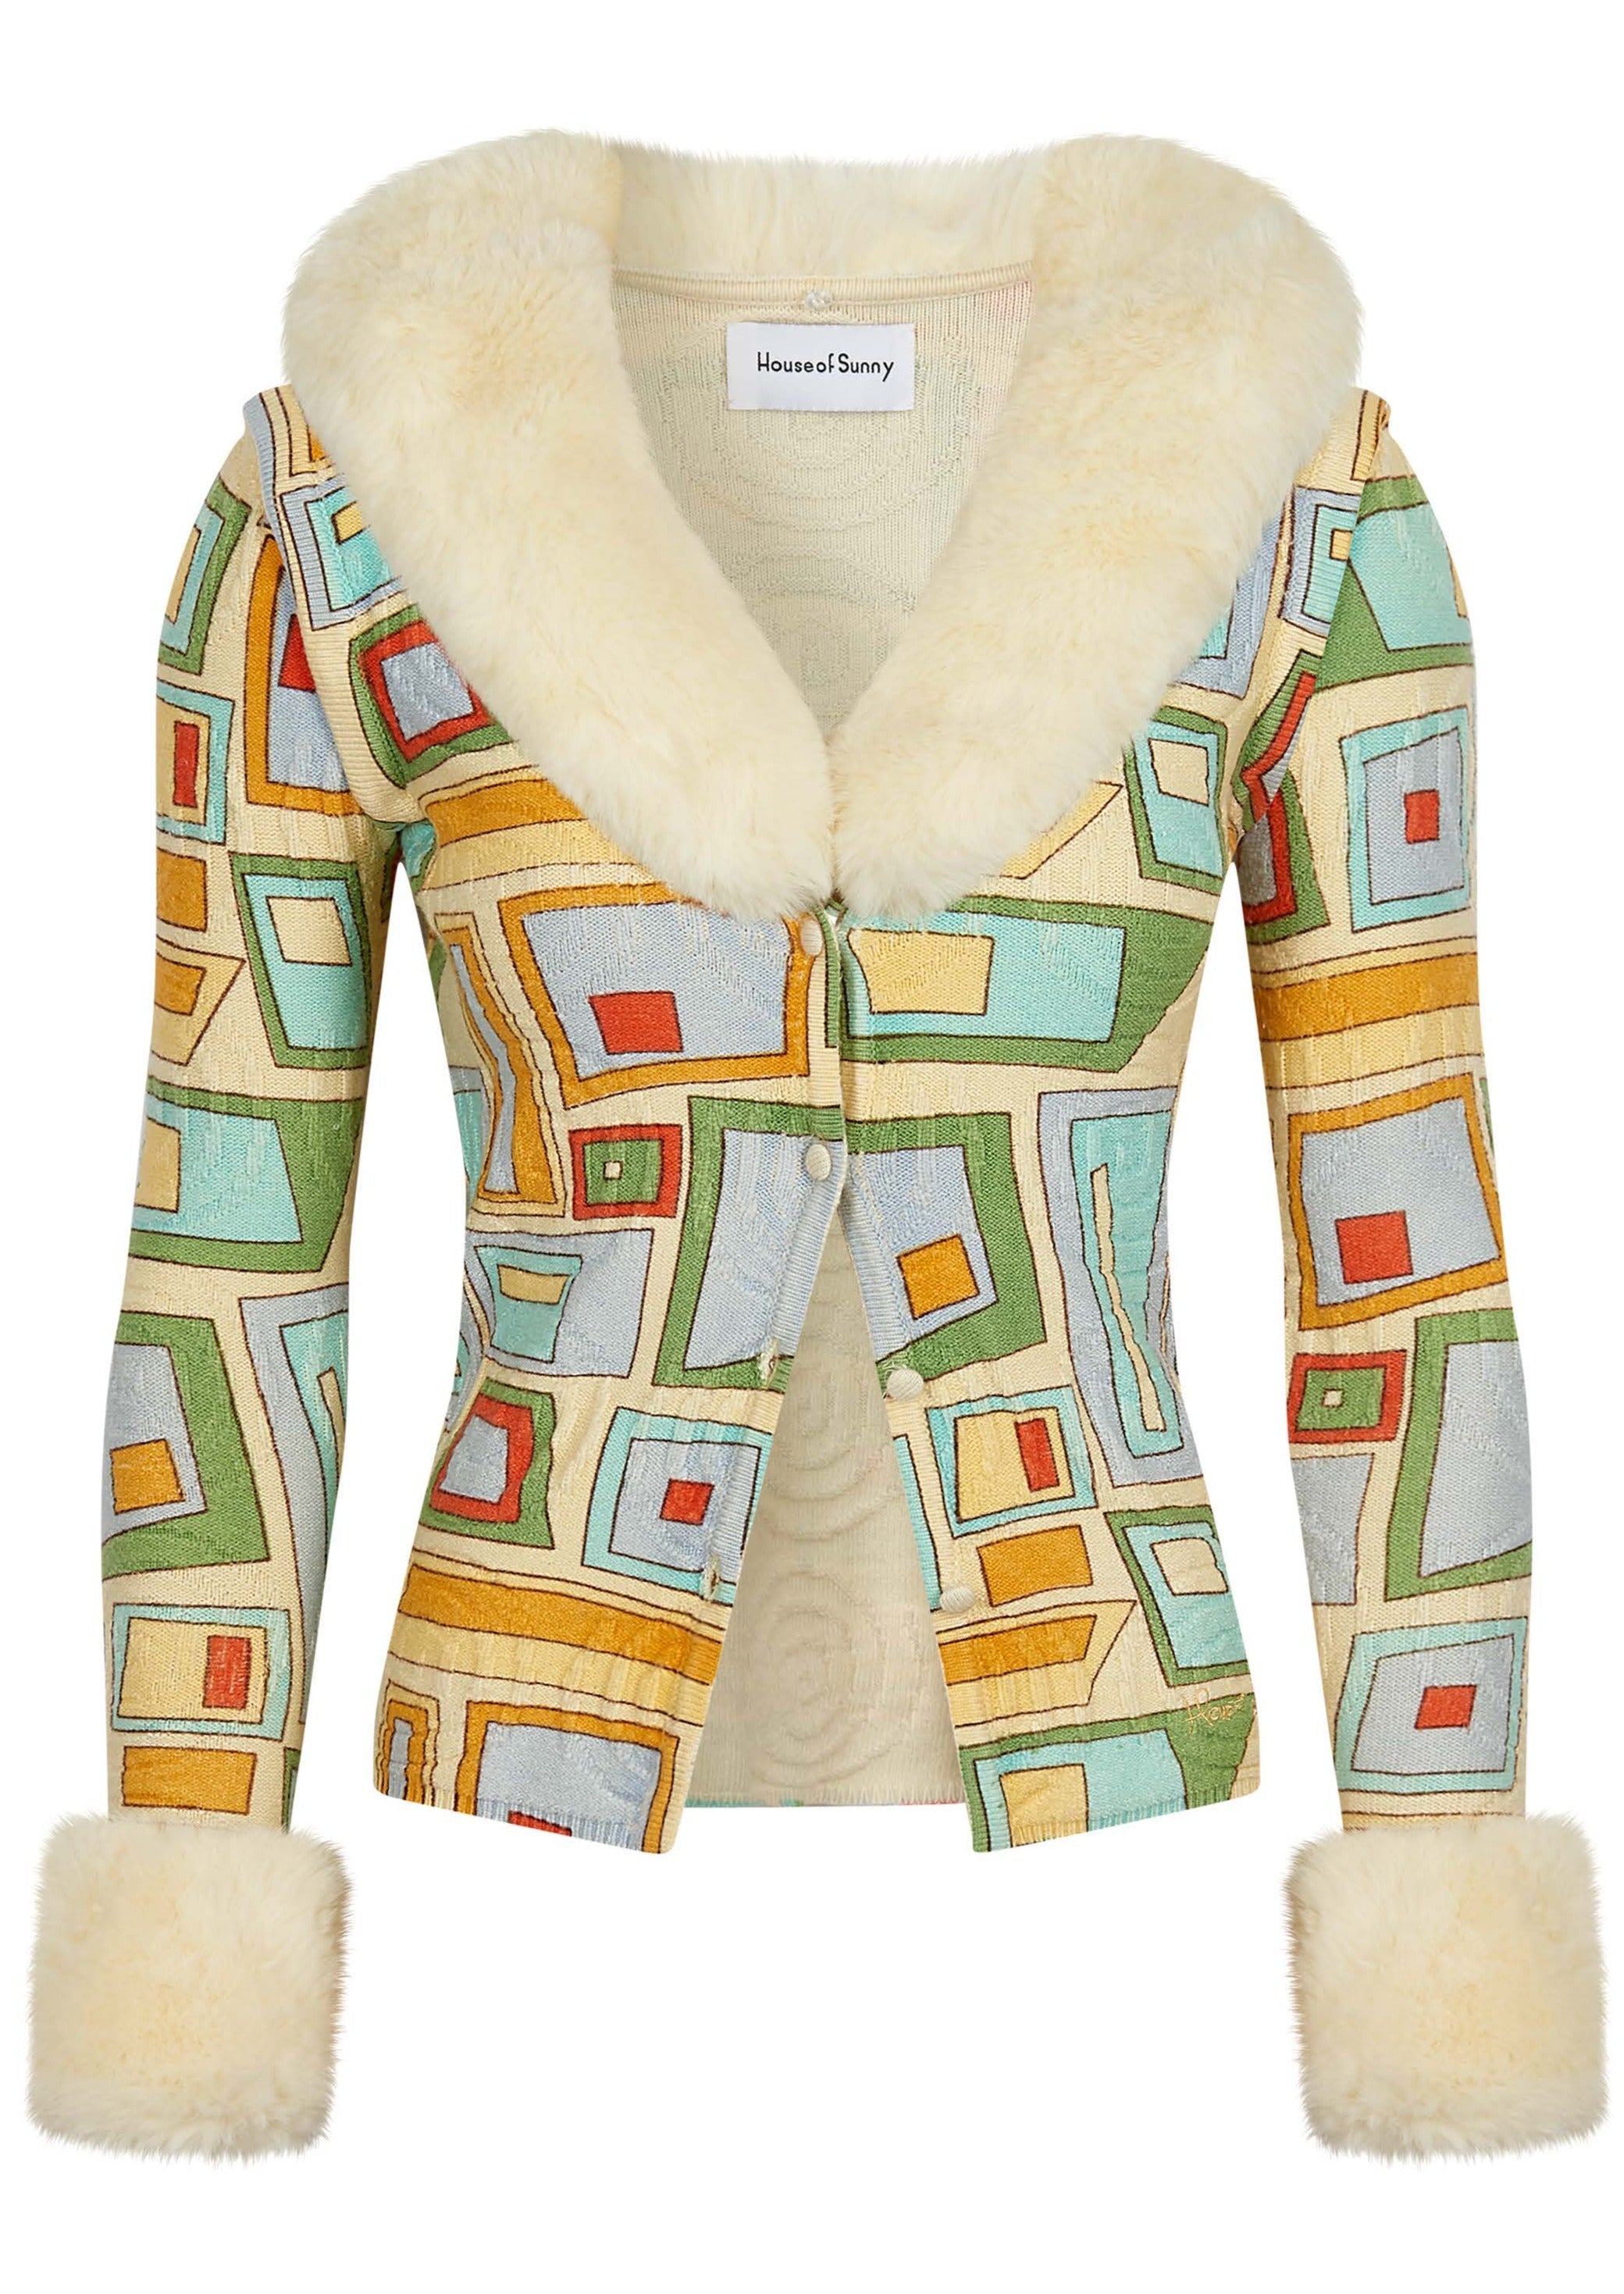 Blue and yellow Rib cardi with Retor print and Detachable fur from the brand House Of Sunny